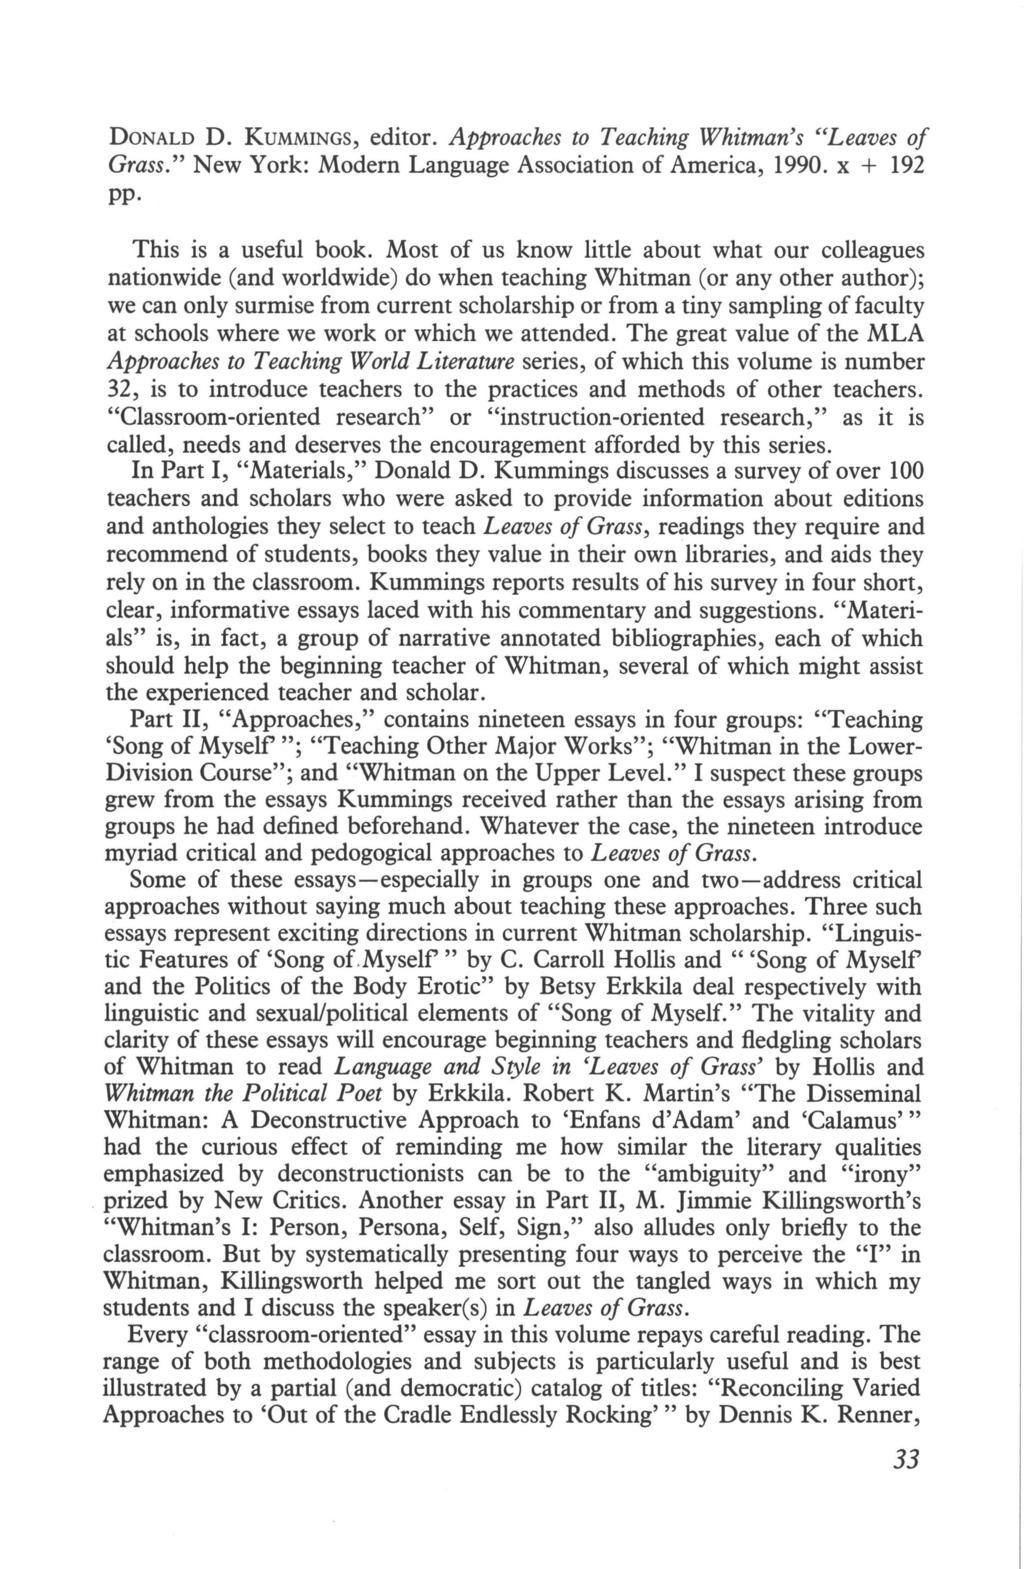 DONALD D. KUMMINGS, editor. Approaches to Teaching Whitman's "Leaves of Grass." New York: Modern Language Association of America, 1990. x + 192 pp. This is a useful book.